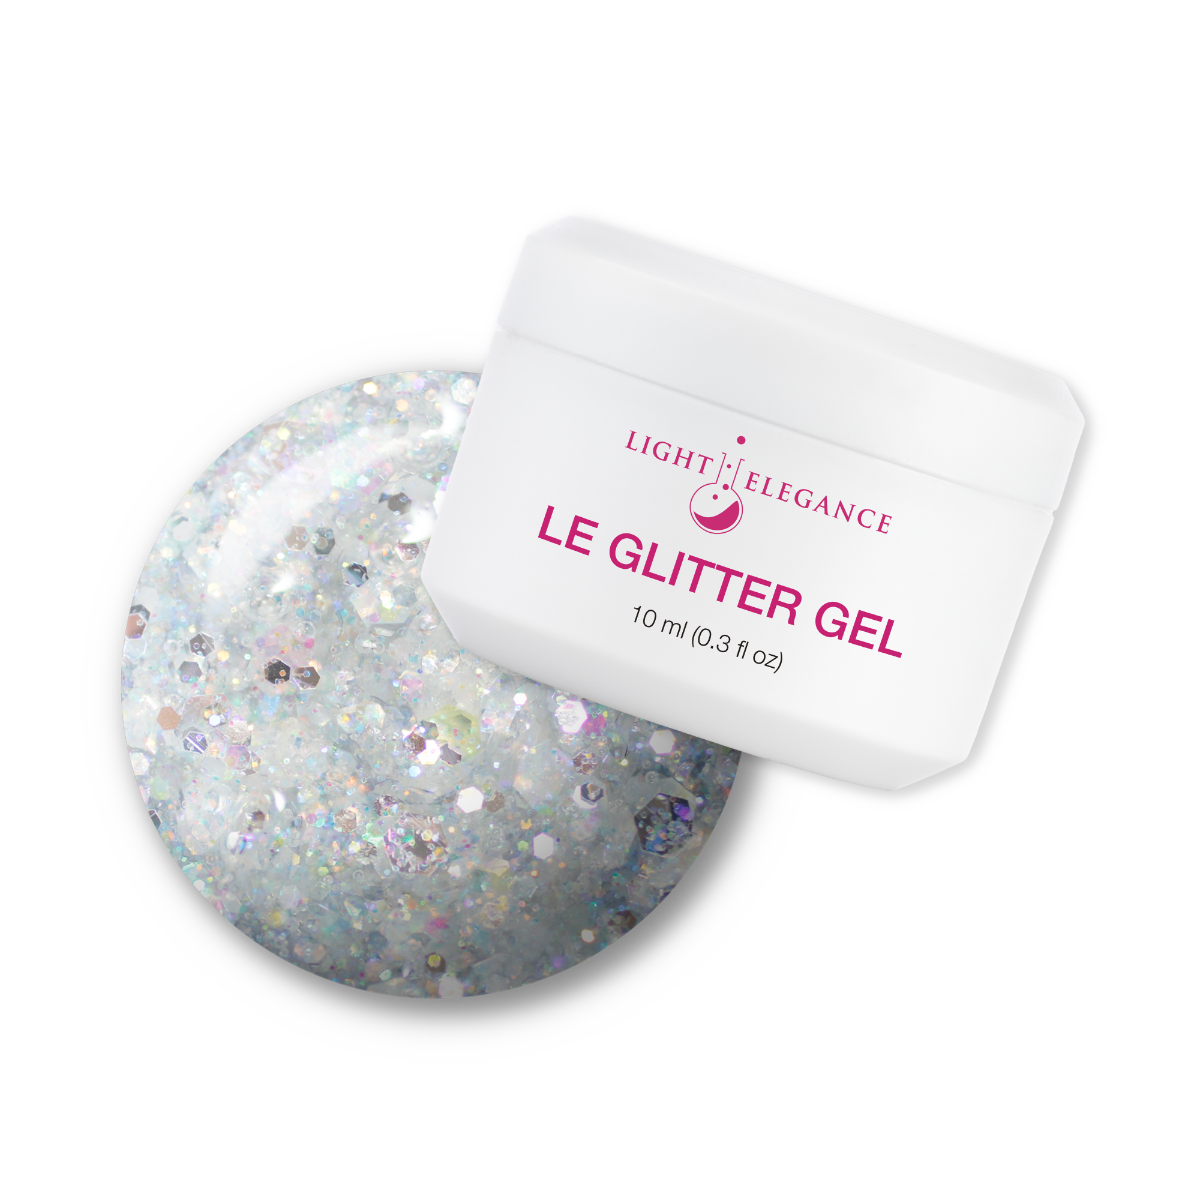 Light Elegance Glitter Gel - A Spot by the Stream :: New Packaging - Creata Beauty - Professional Beauty Products